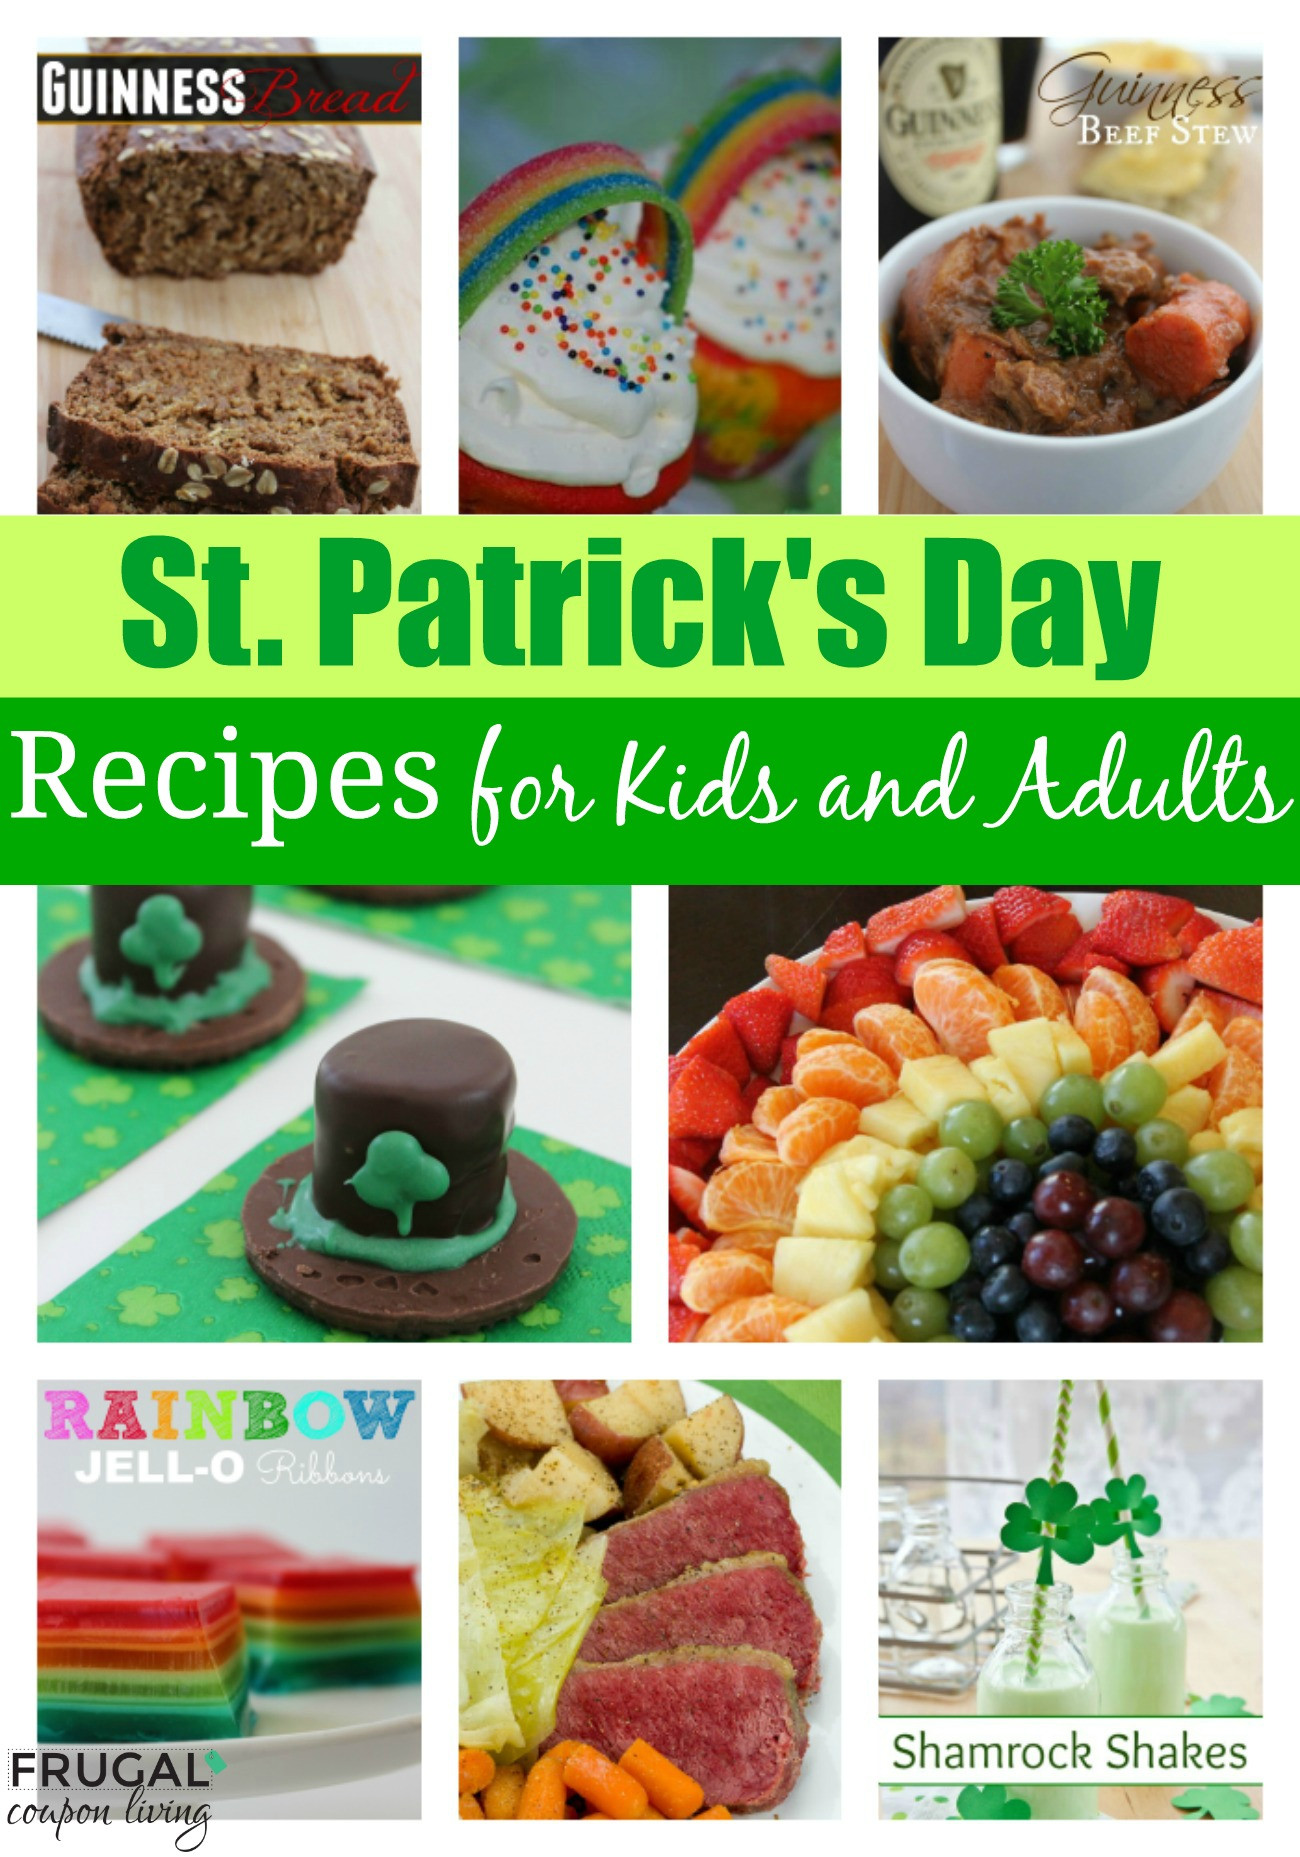 St Patrick's Day Meals Ideas
 St Patrick s Day Food Ideas for Kids and Adults